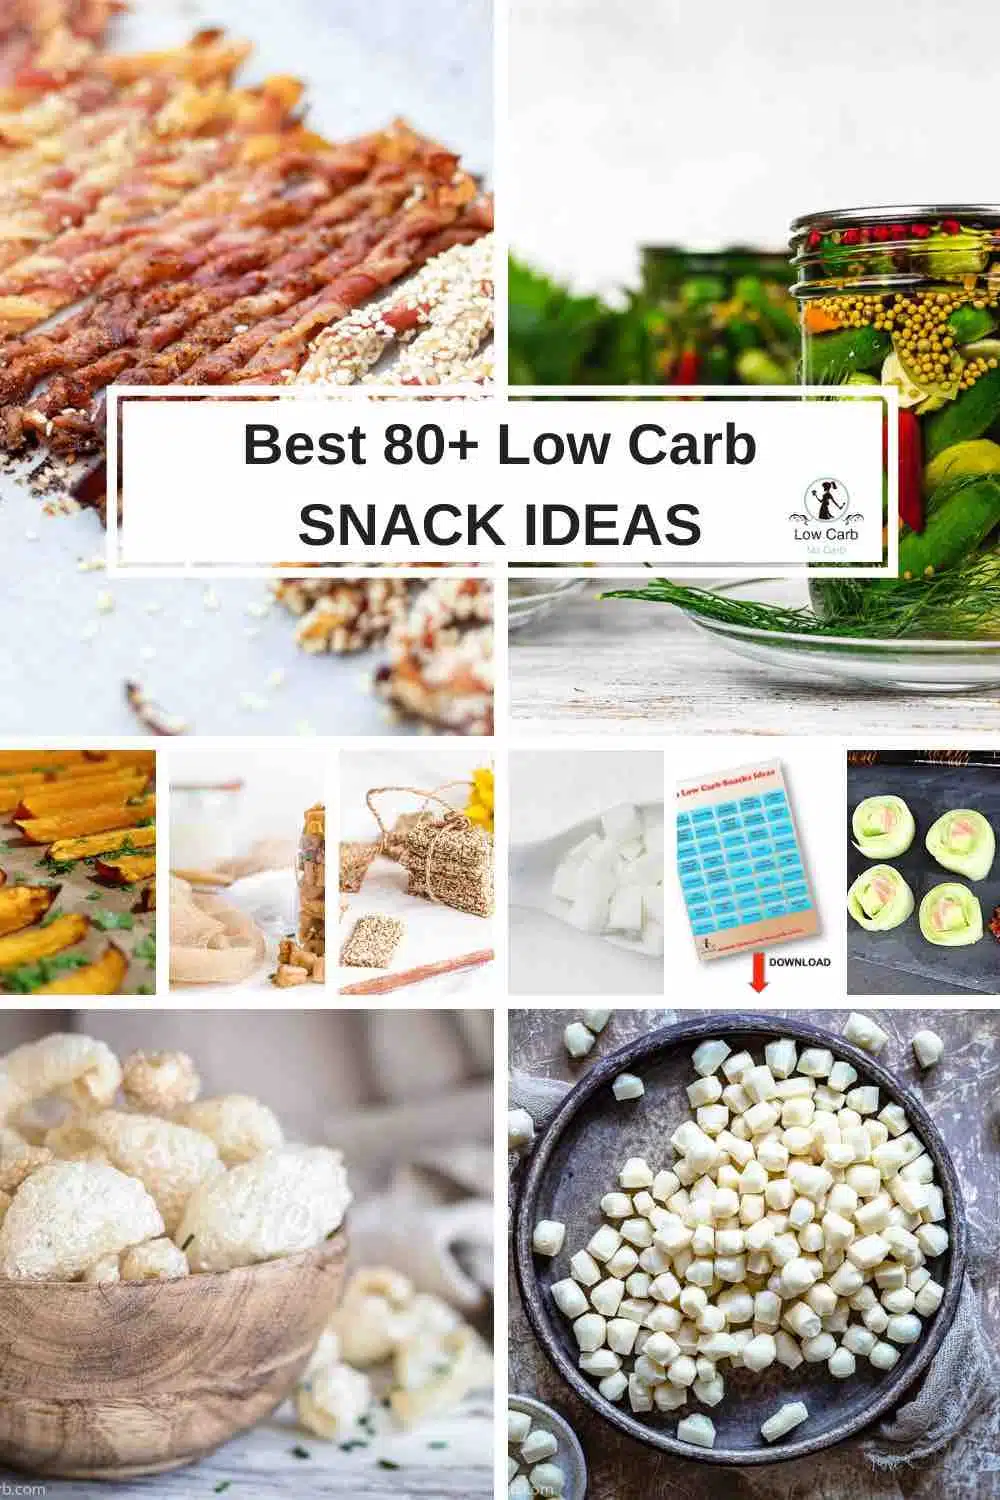 Snack ideas and recipes with images.